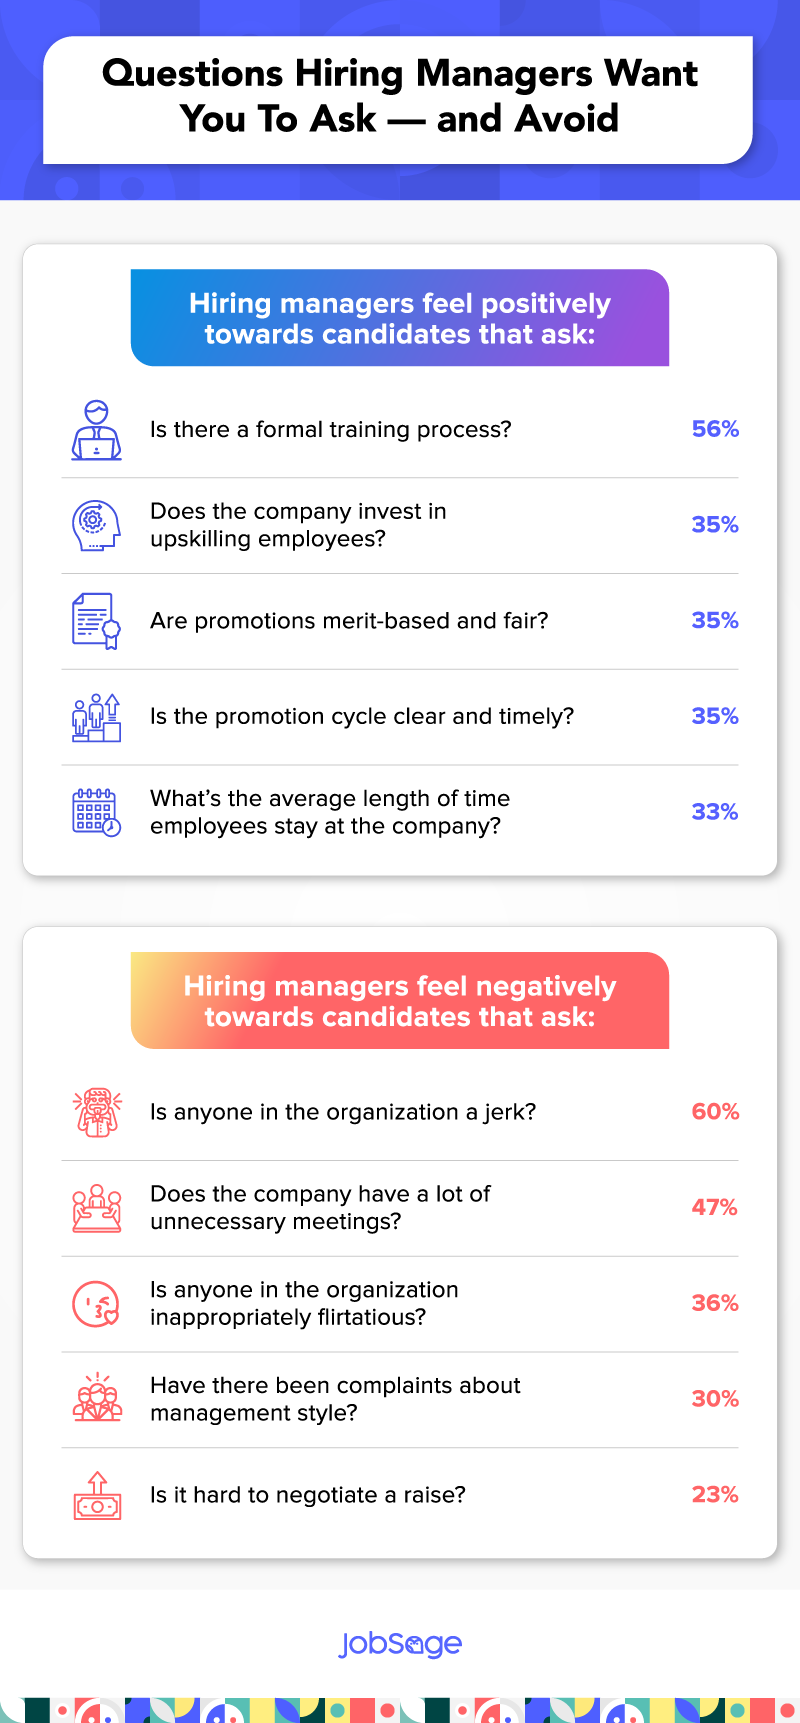  the questions hiring managers like and dislike